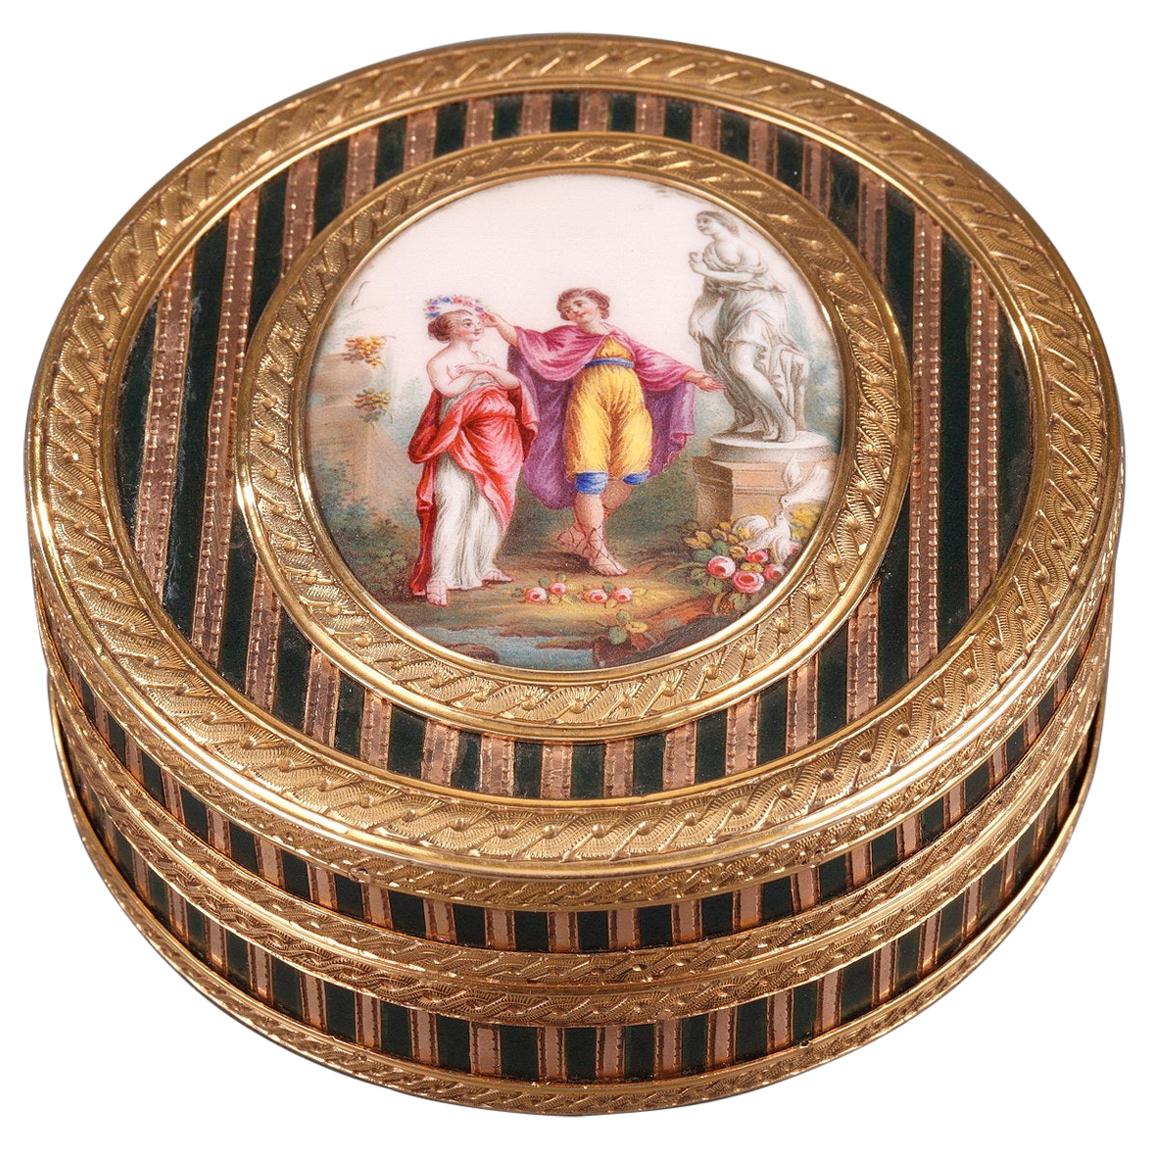 Gold, Enamel, and Lacquer Box, Louis XV Period